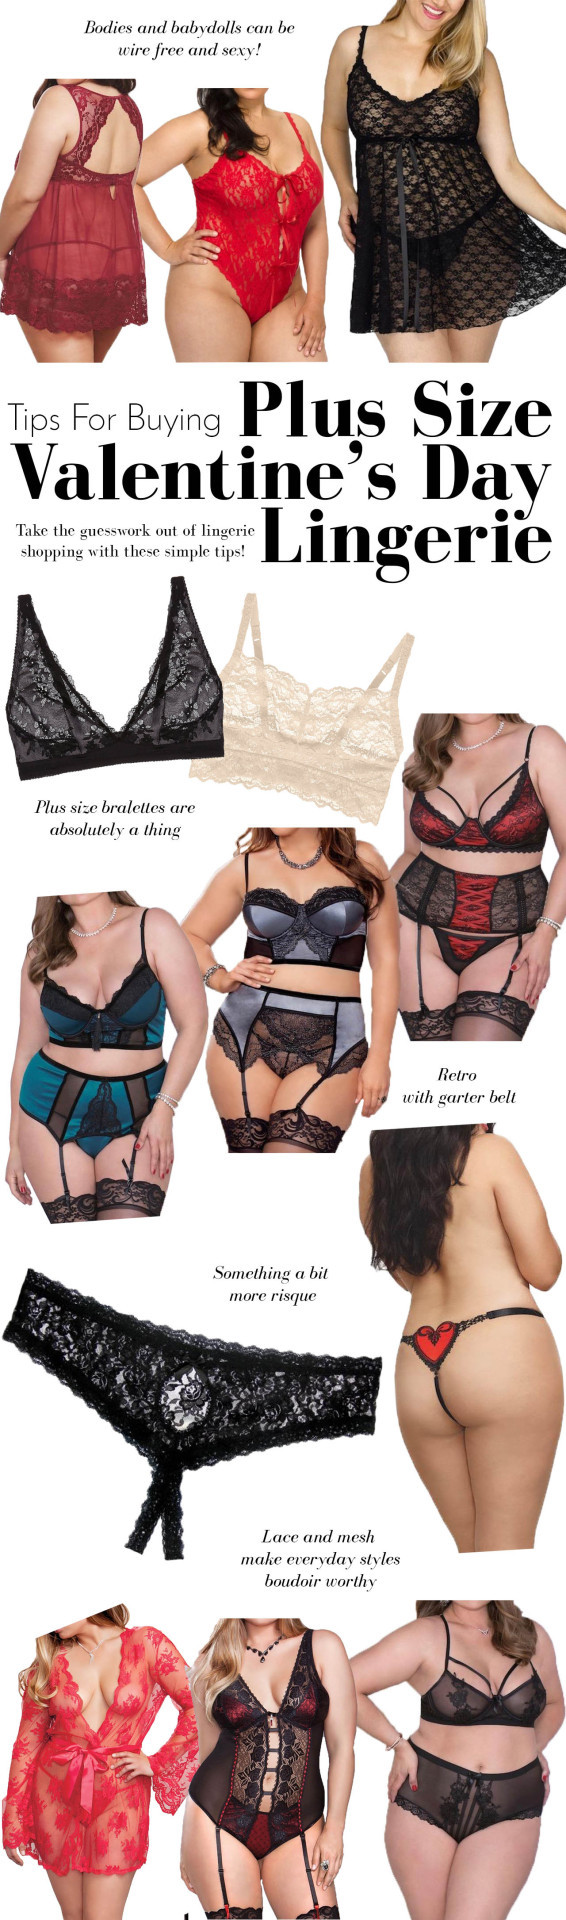 Tips For Buying Plus Size Valentine's Day Lingerie – A Curious Fancy